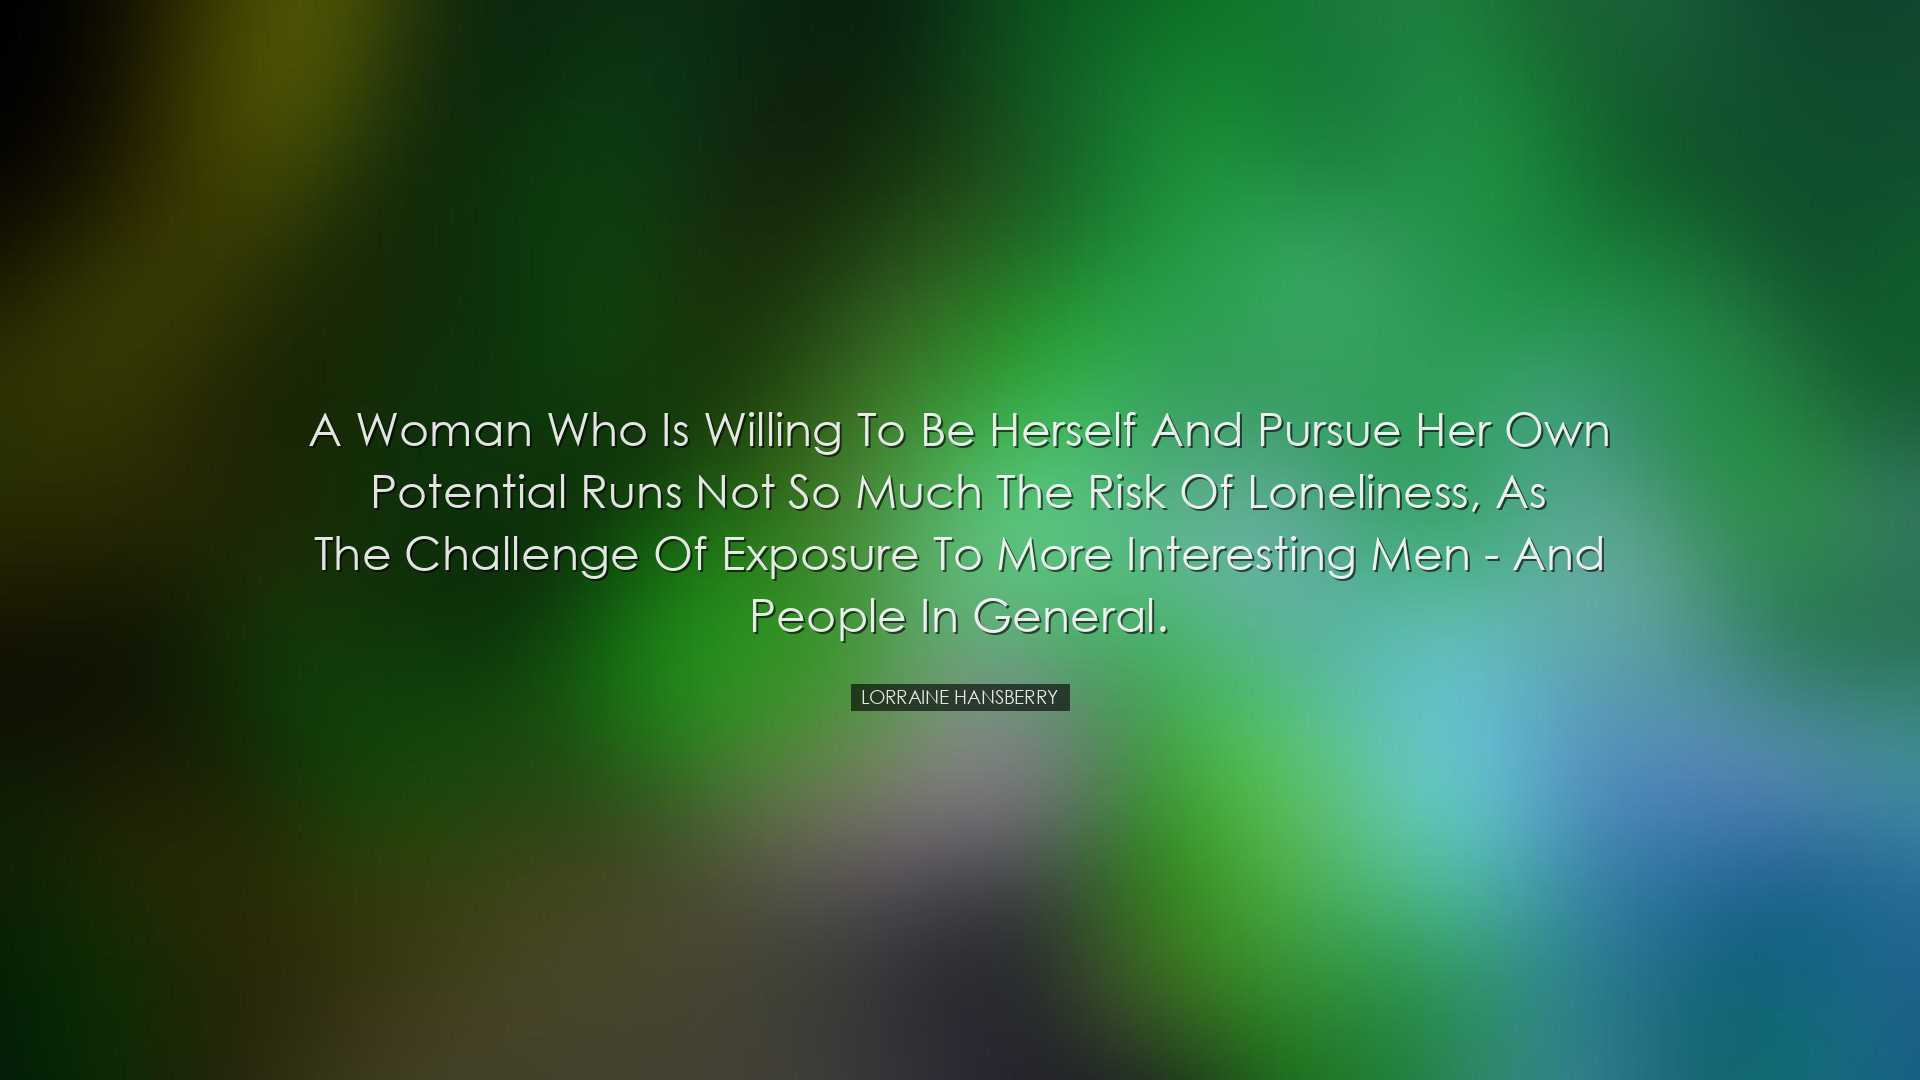 A woman who is willing to be herself and pursue her own potential